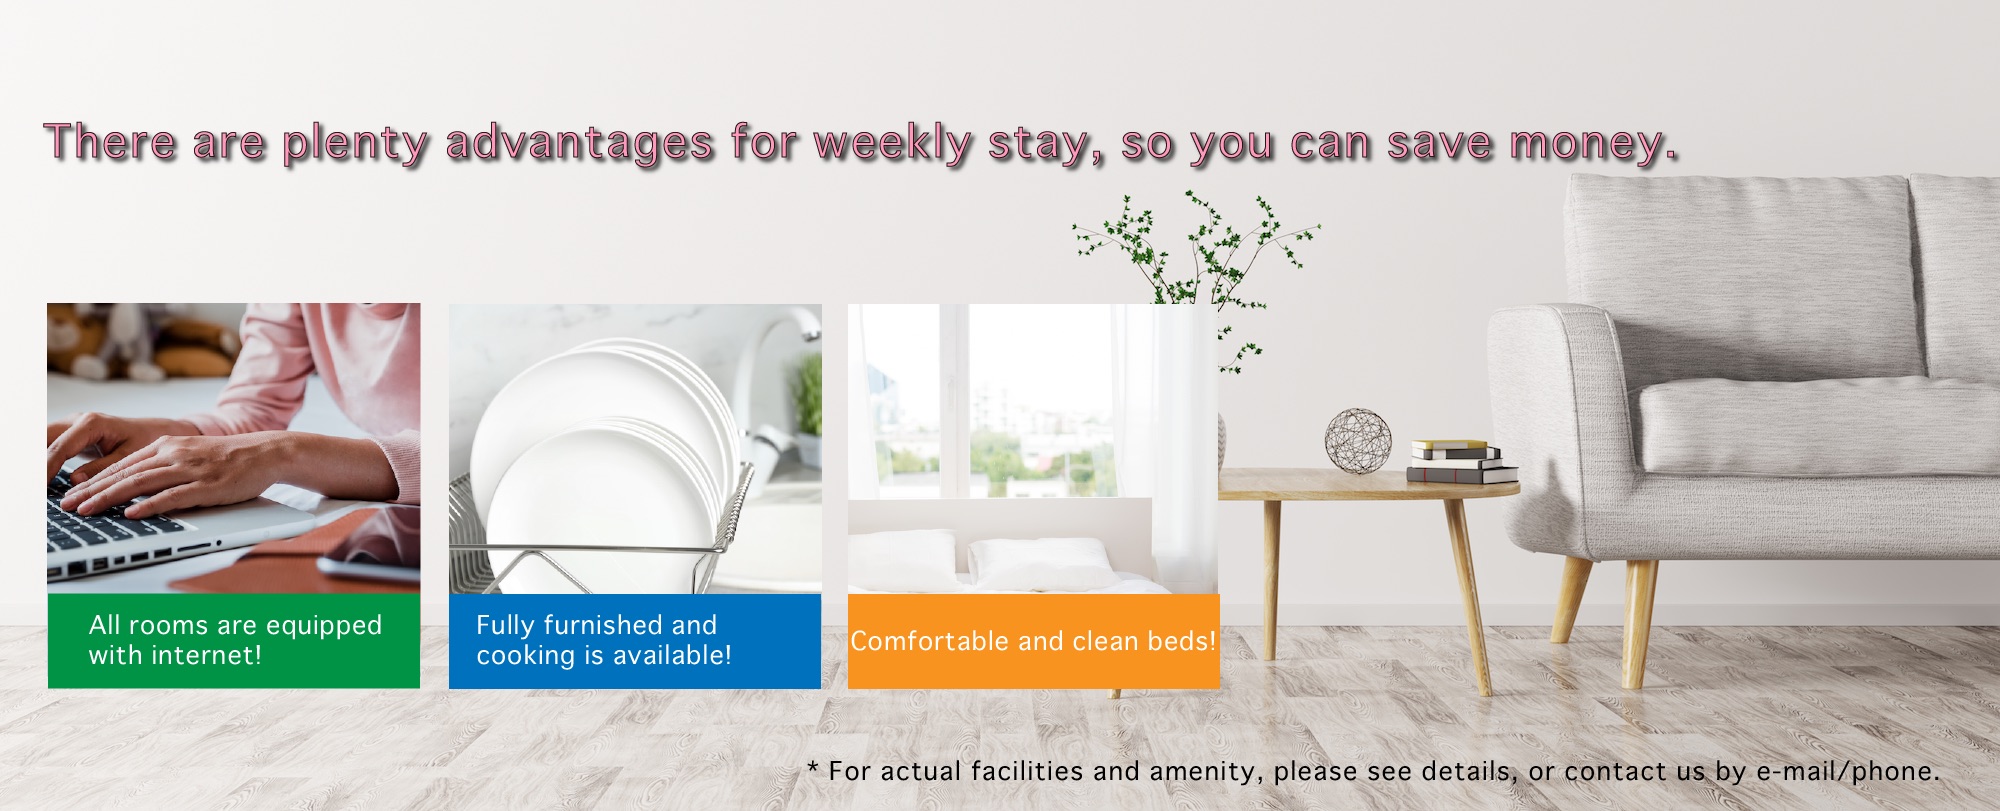 There are plenty advantages for weekly stay, so you can save money.